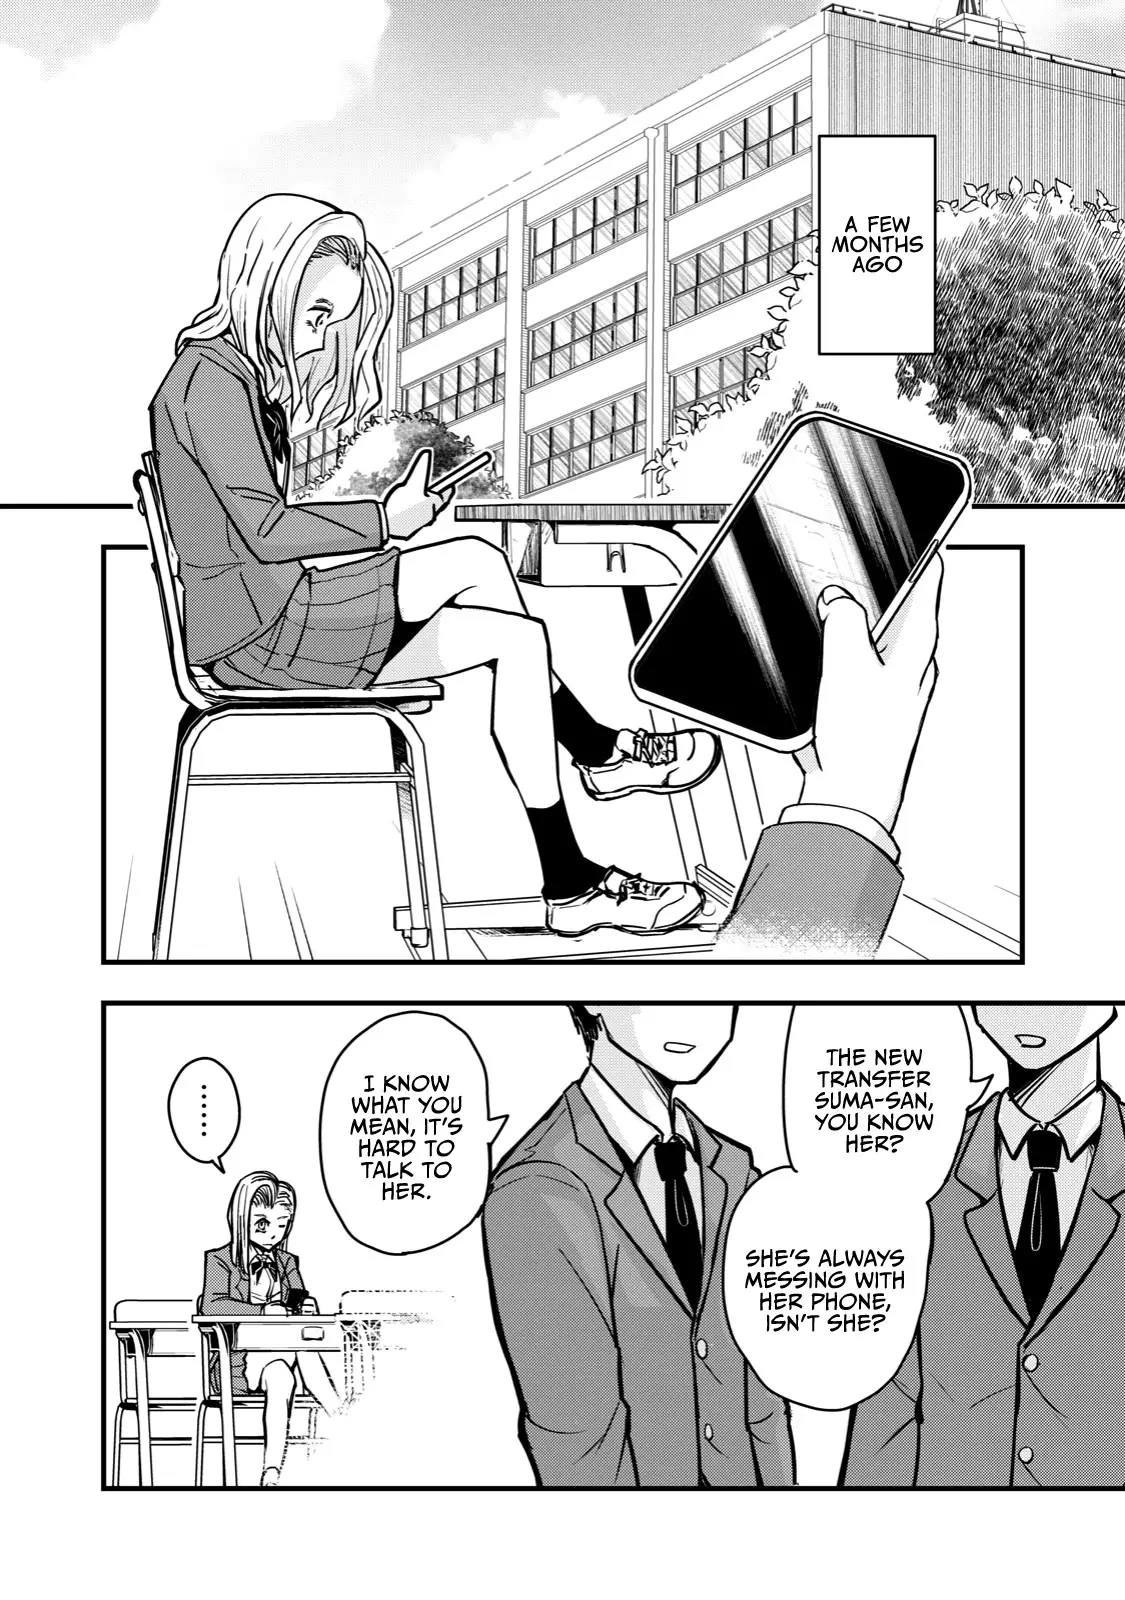 A Manga About The Kind Of Pe Teacher Who Dies At The Start Of A School Horror Movie - 63 page 1-1ce3765e